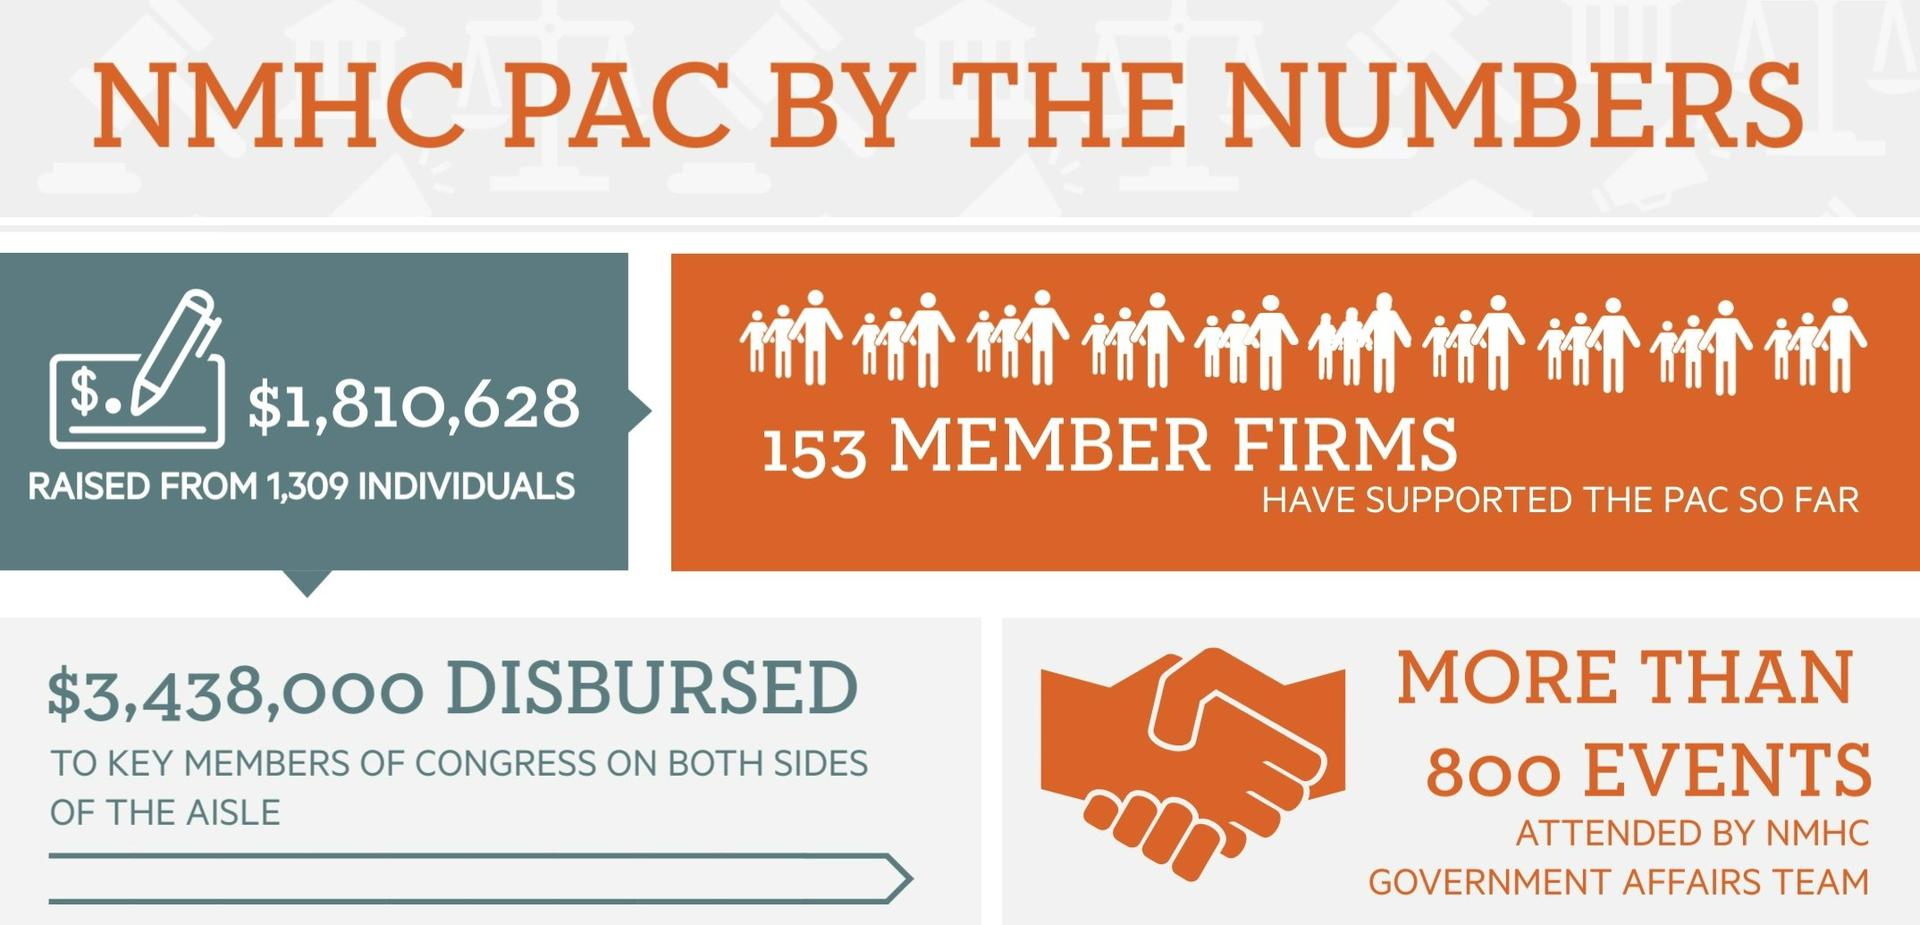 NMHC PAC by the Numbers